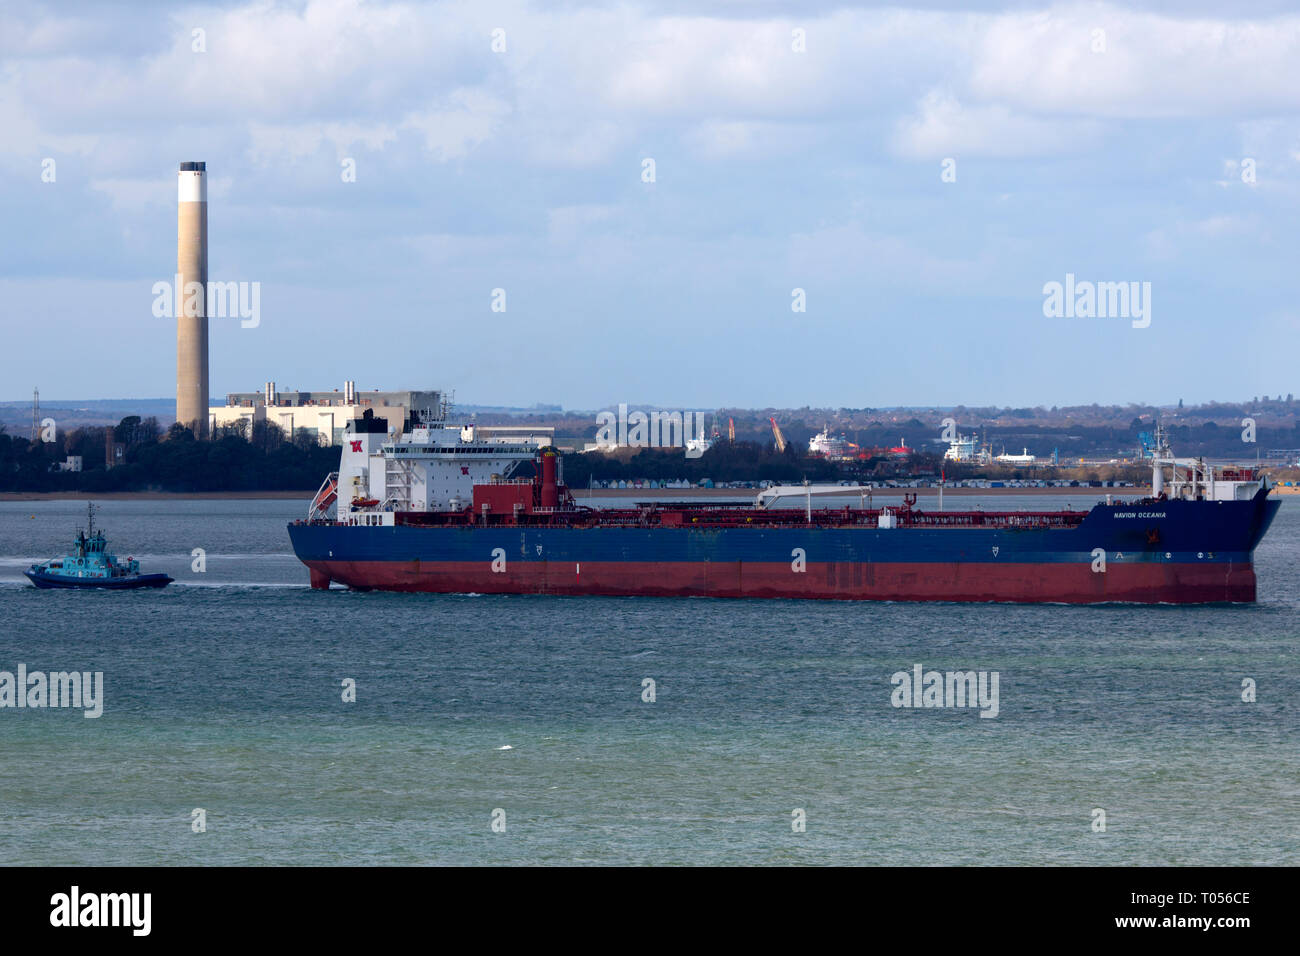 tug assisting, Navion,Voith,Schneider,Oceania,shuttle,oil,tanker,leaving,Fawley,Refinery,Southampton,The Solent,Cowes,Isle of Wight,England,UK, Stock Photo